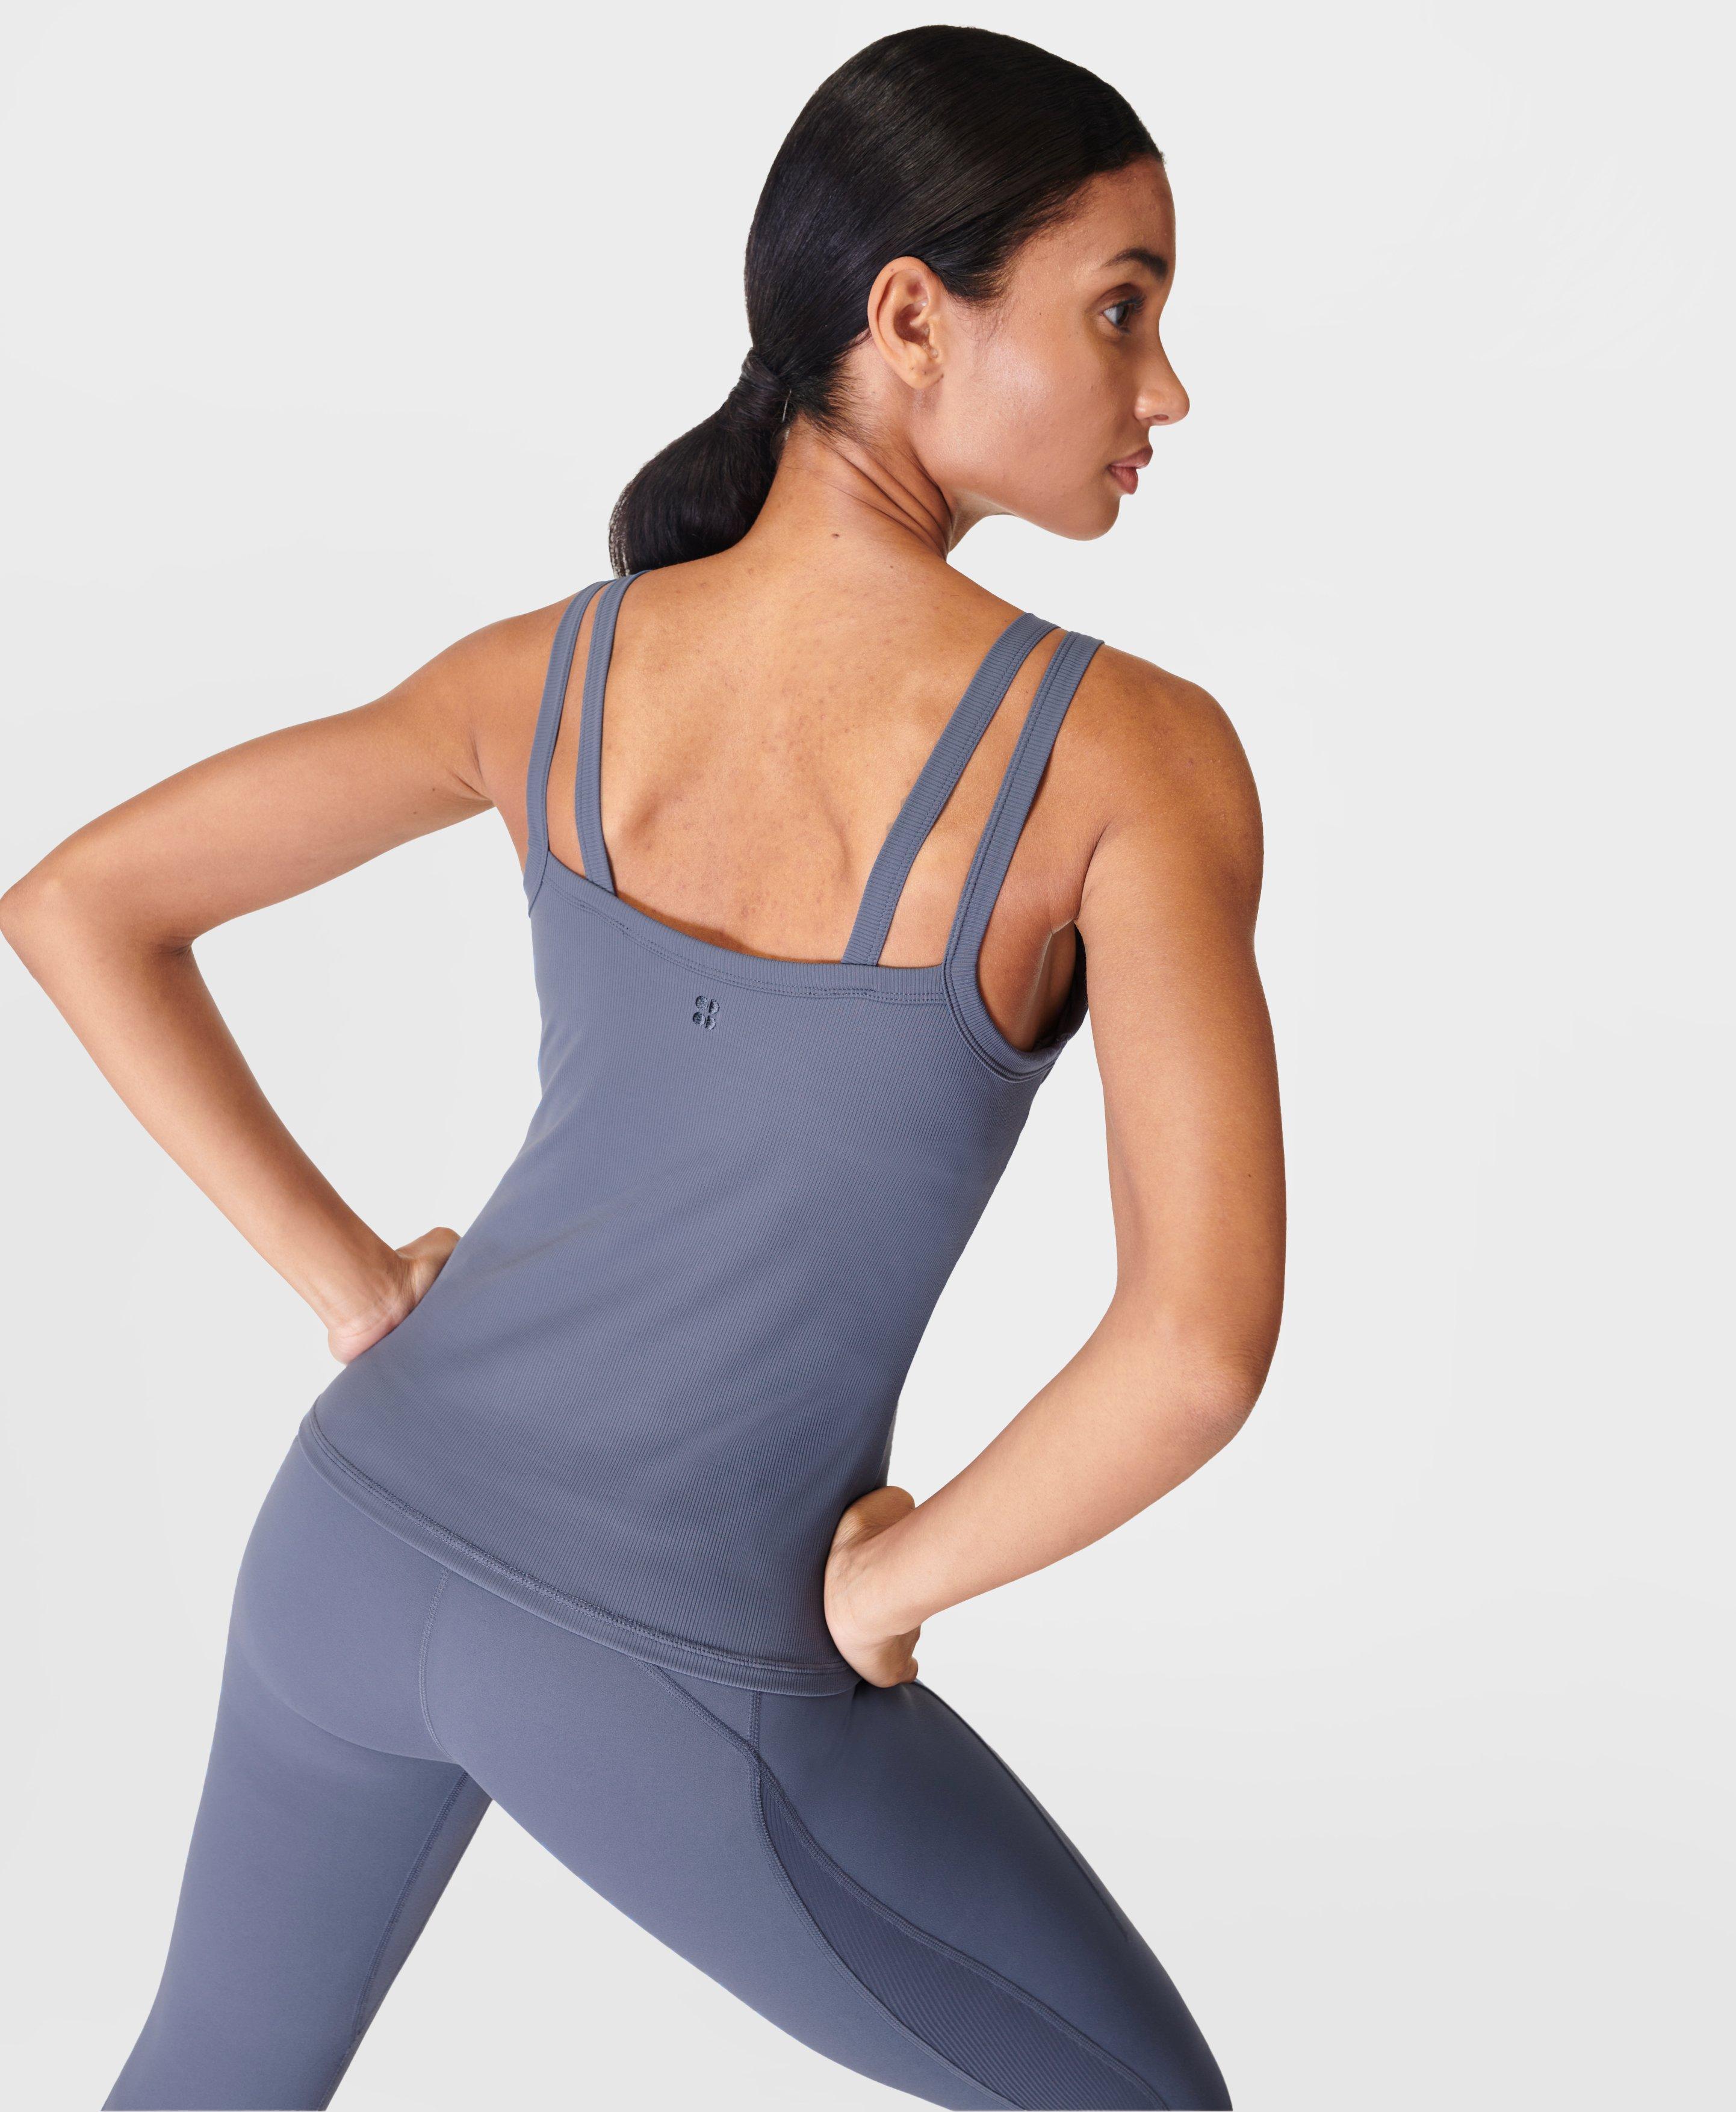 50% Off Yoga Jumpsuits For Women Ribbed One Piece Tank Top